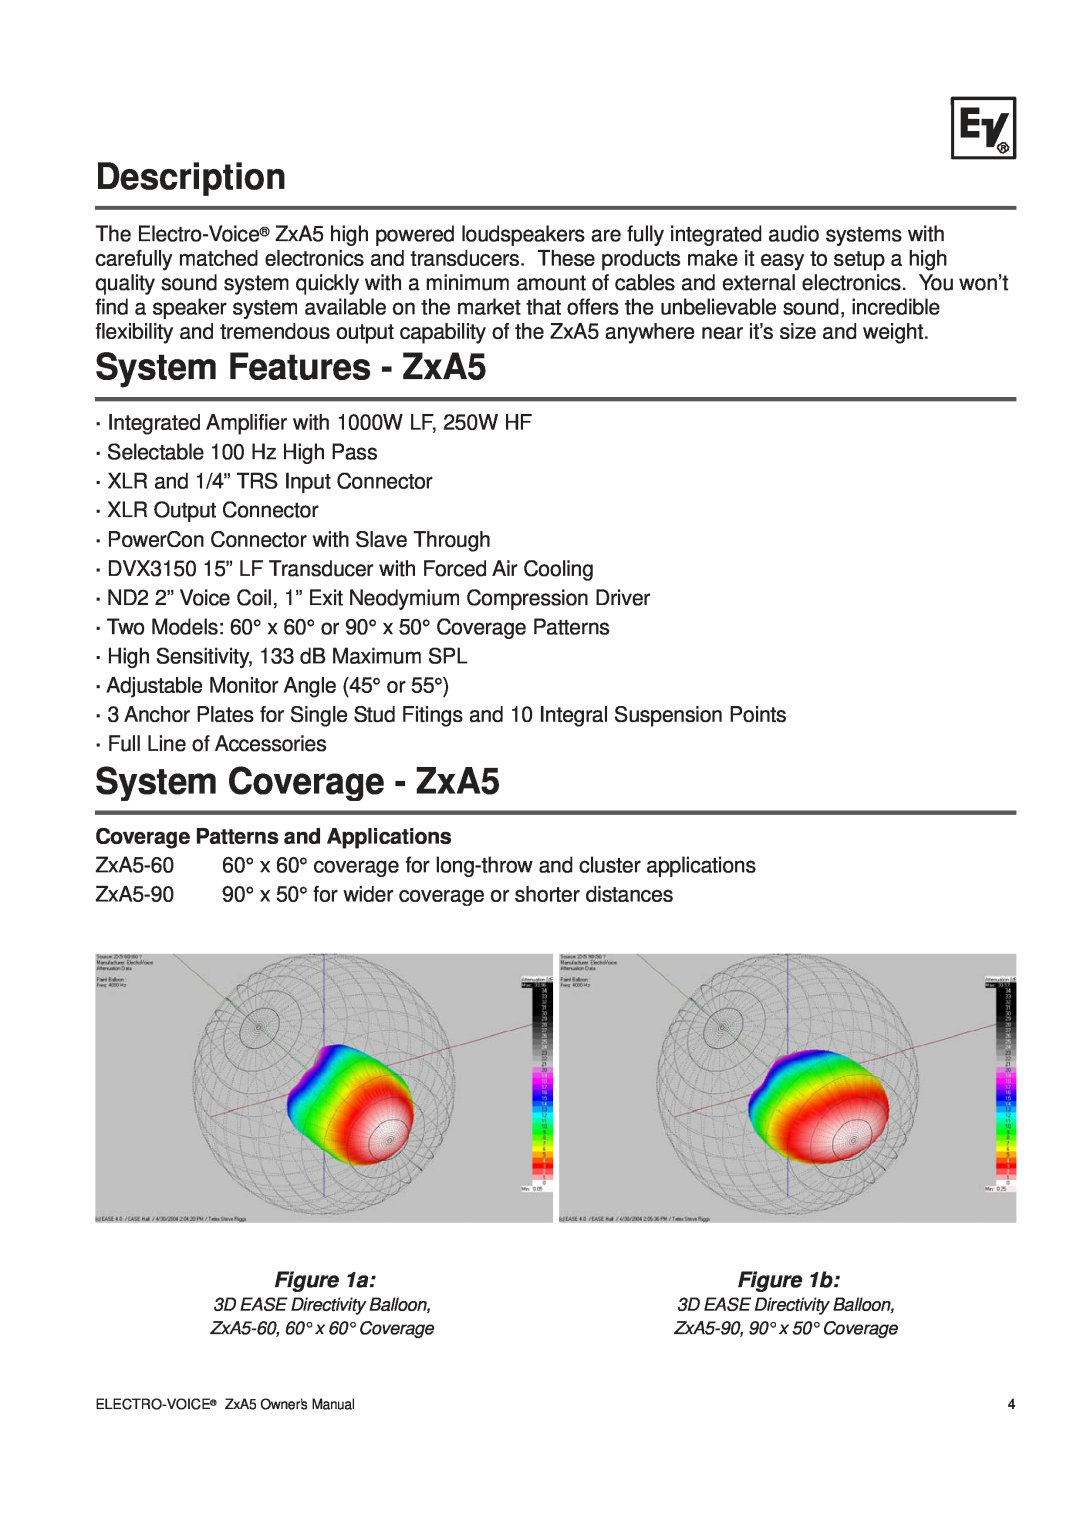 Pentax ZXA5-90, ZXA5-60 Description, System Features - ZxA5, System Coverage - ZxA5, Coverage Patterns and Applications 